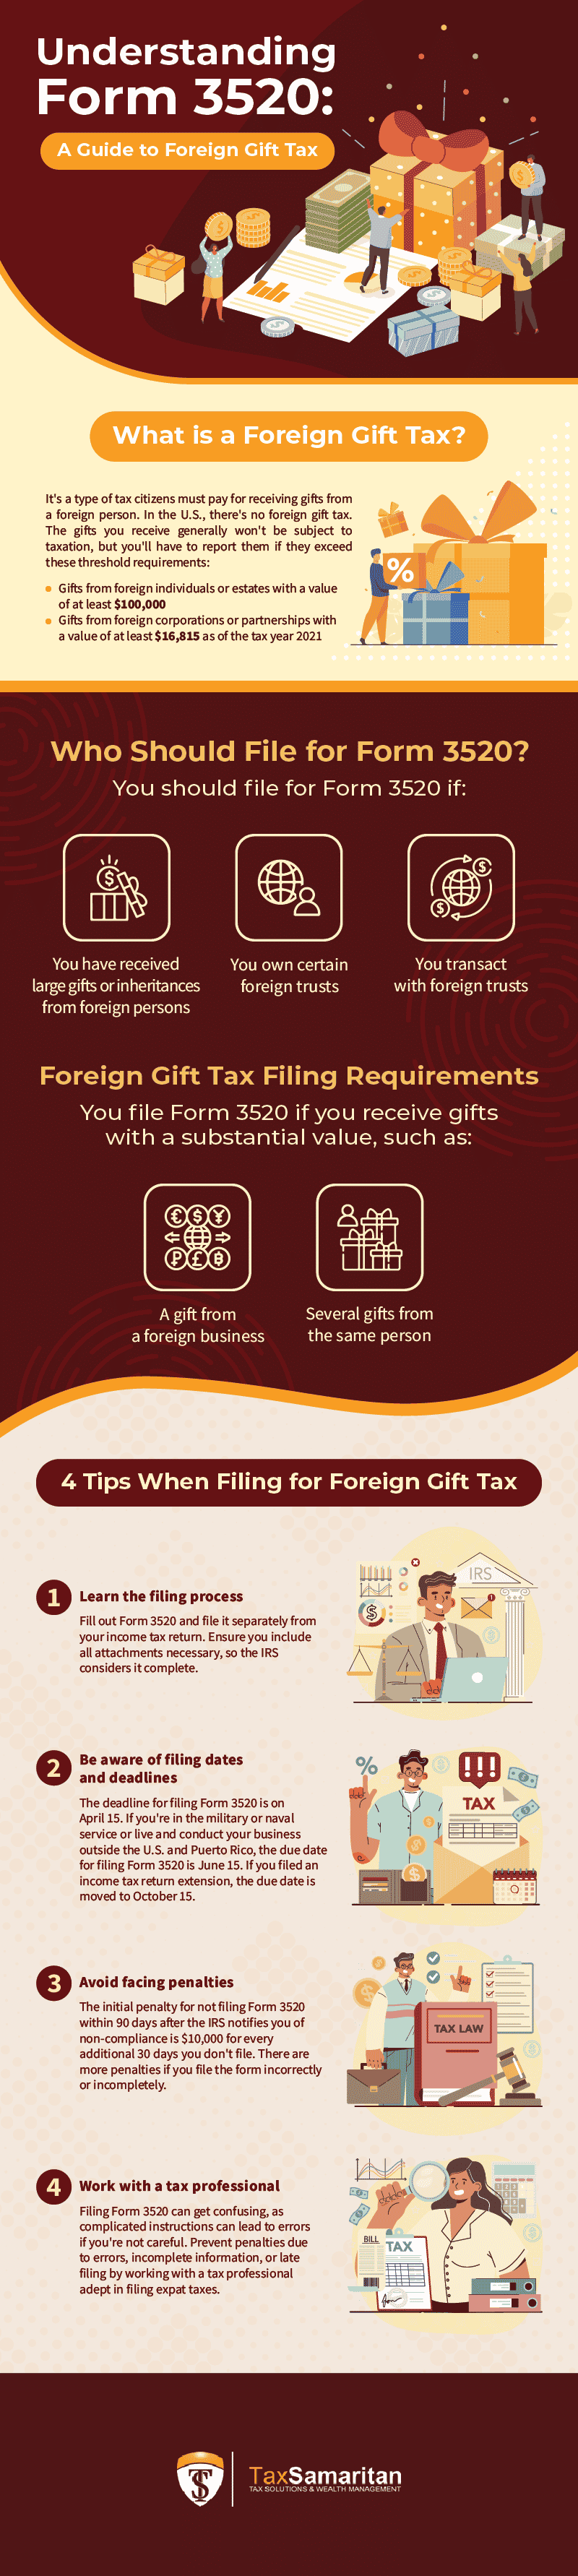 Understanding Form 3520: A Guide to Foreign Gift Tax